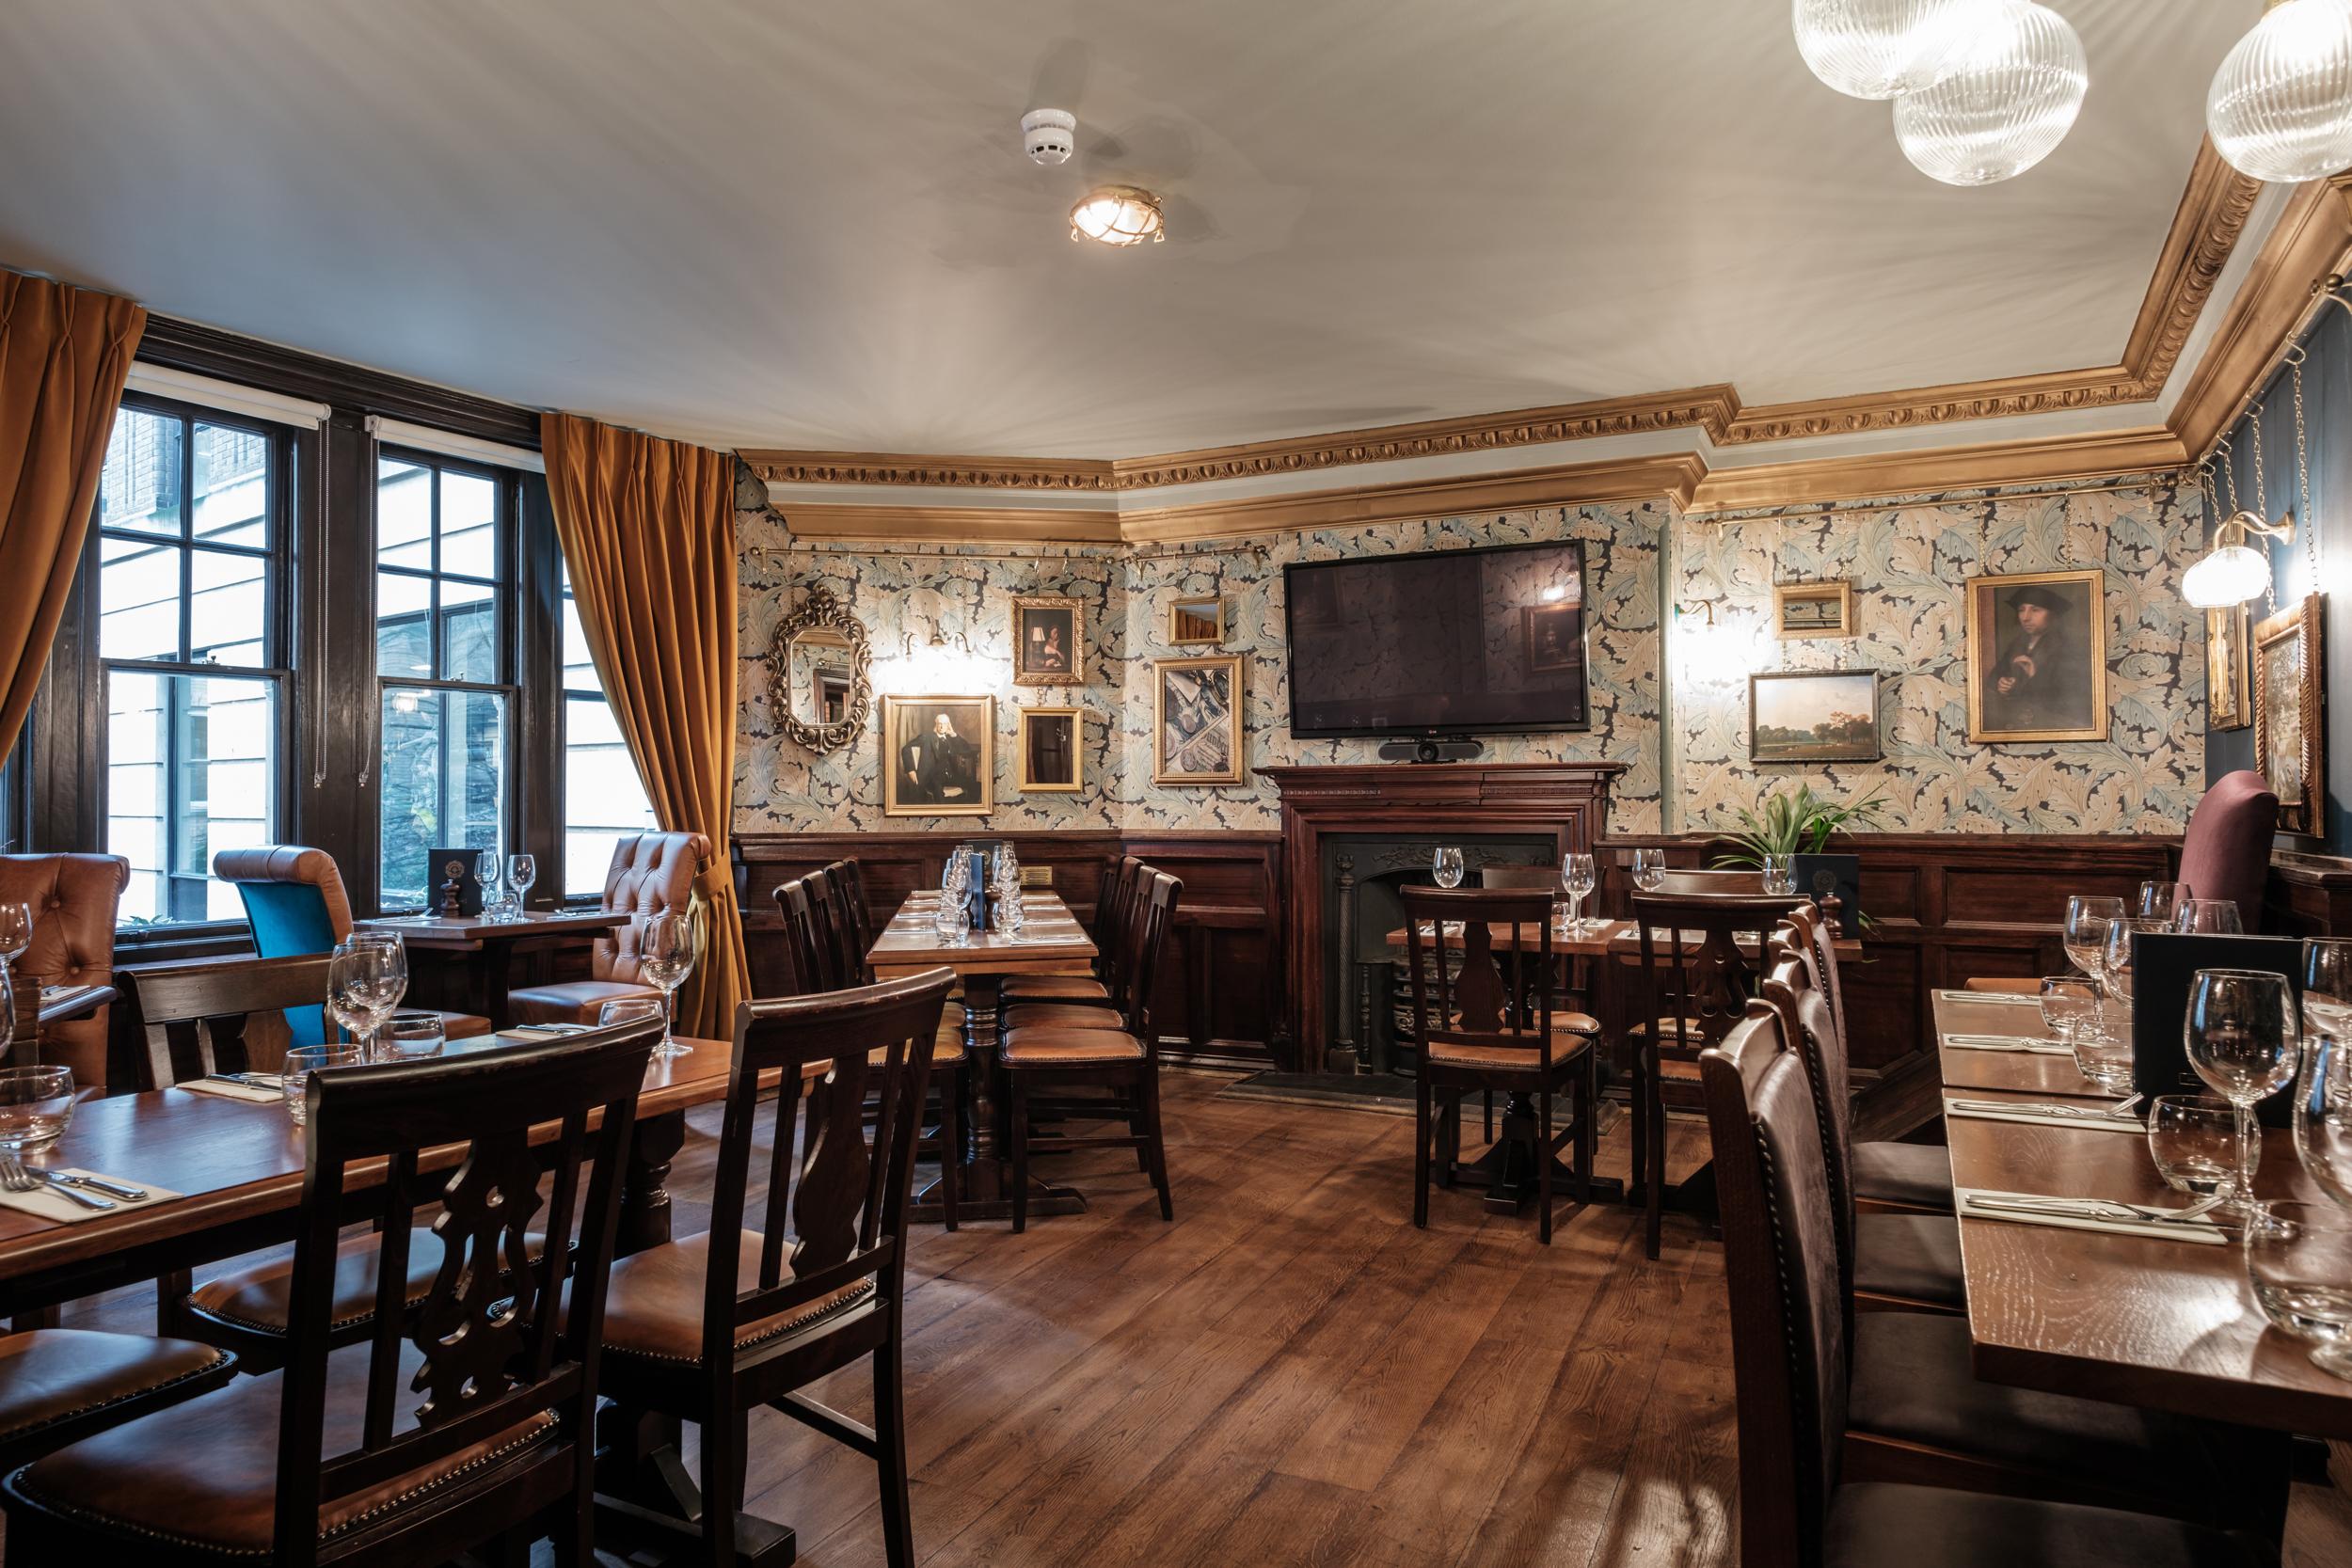 The Gallery Room, The Counting House photo #2